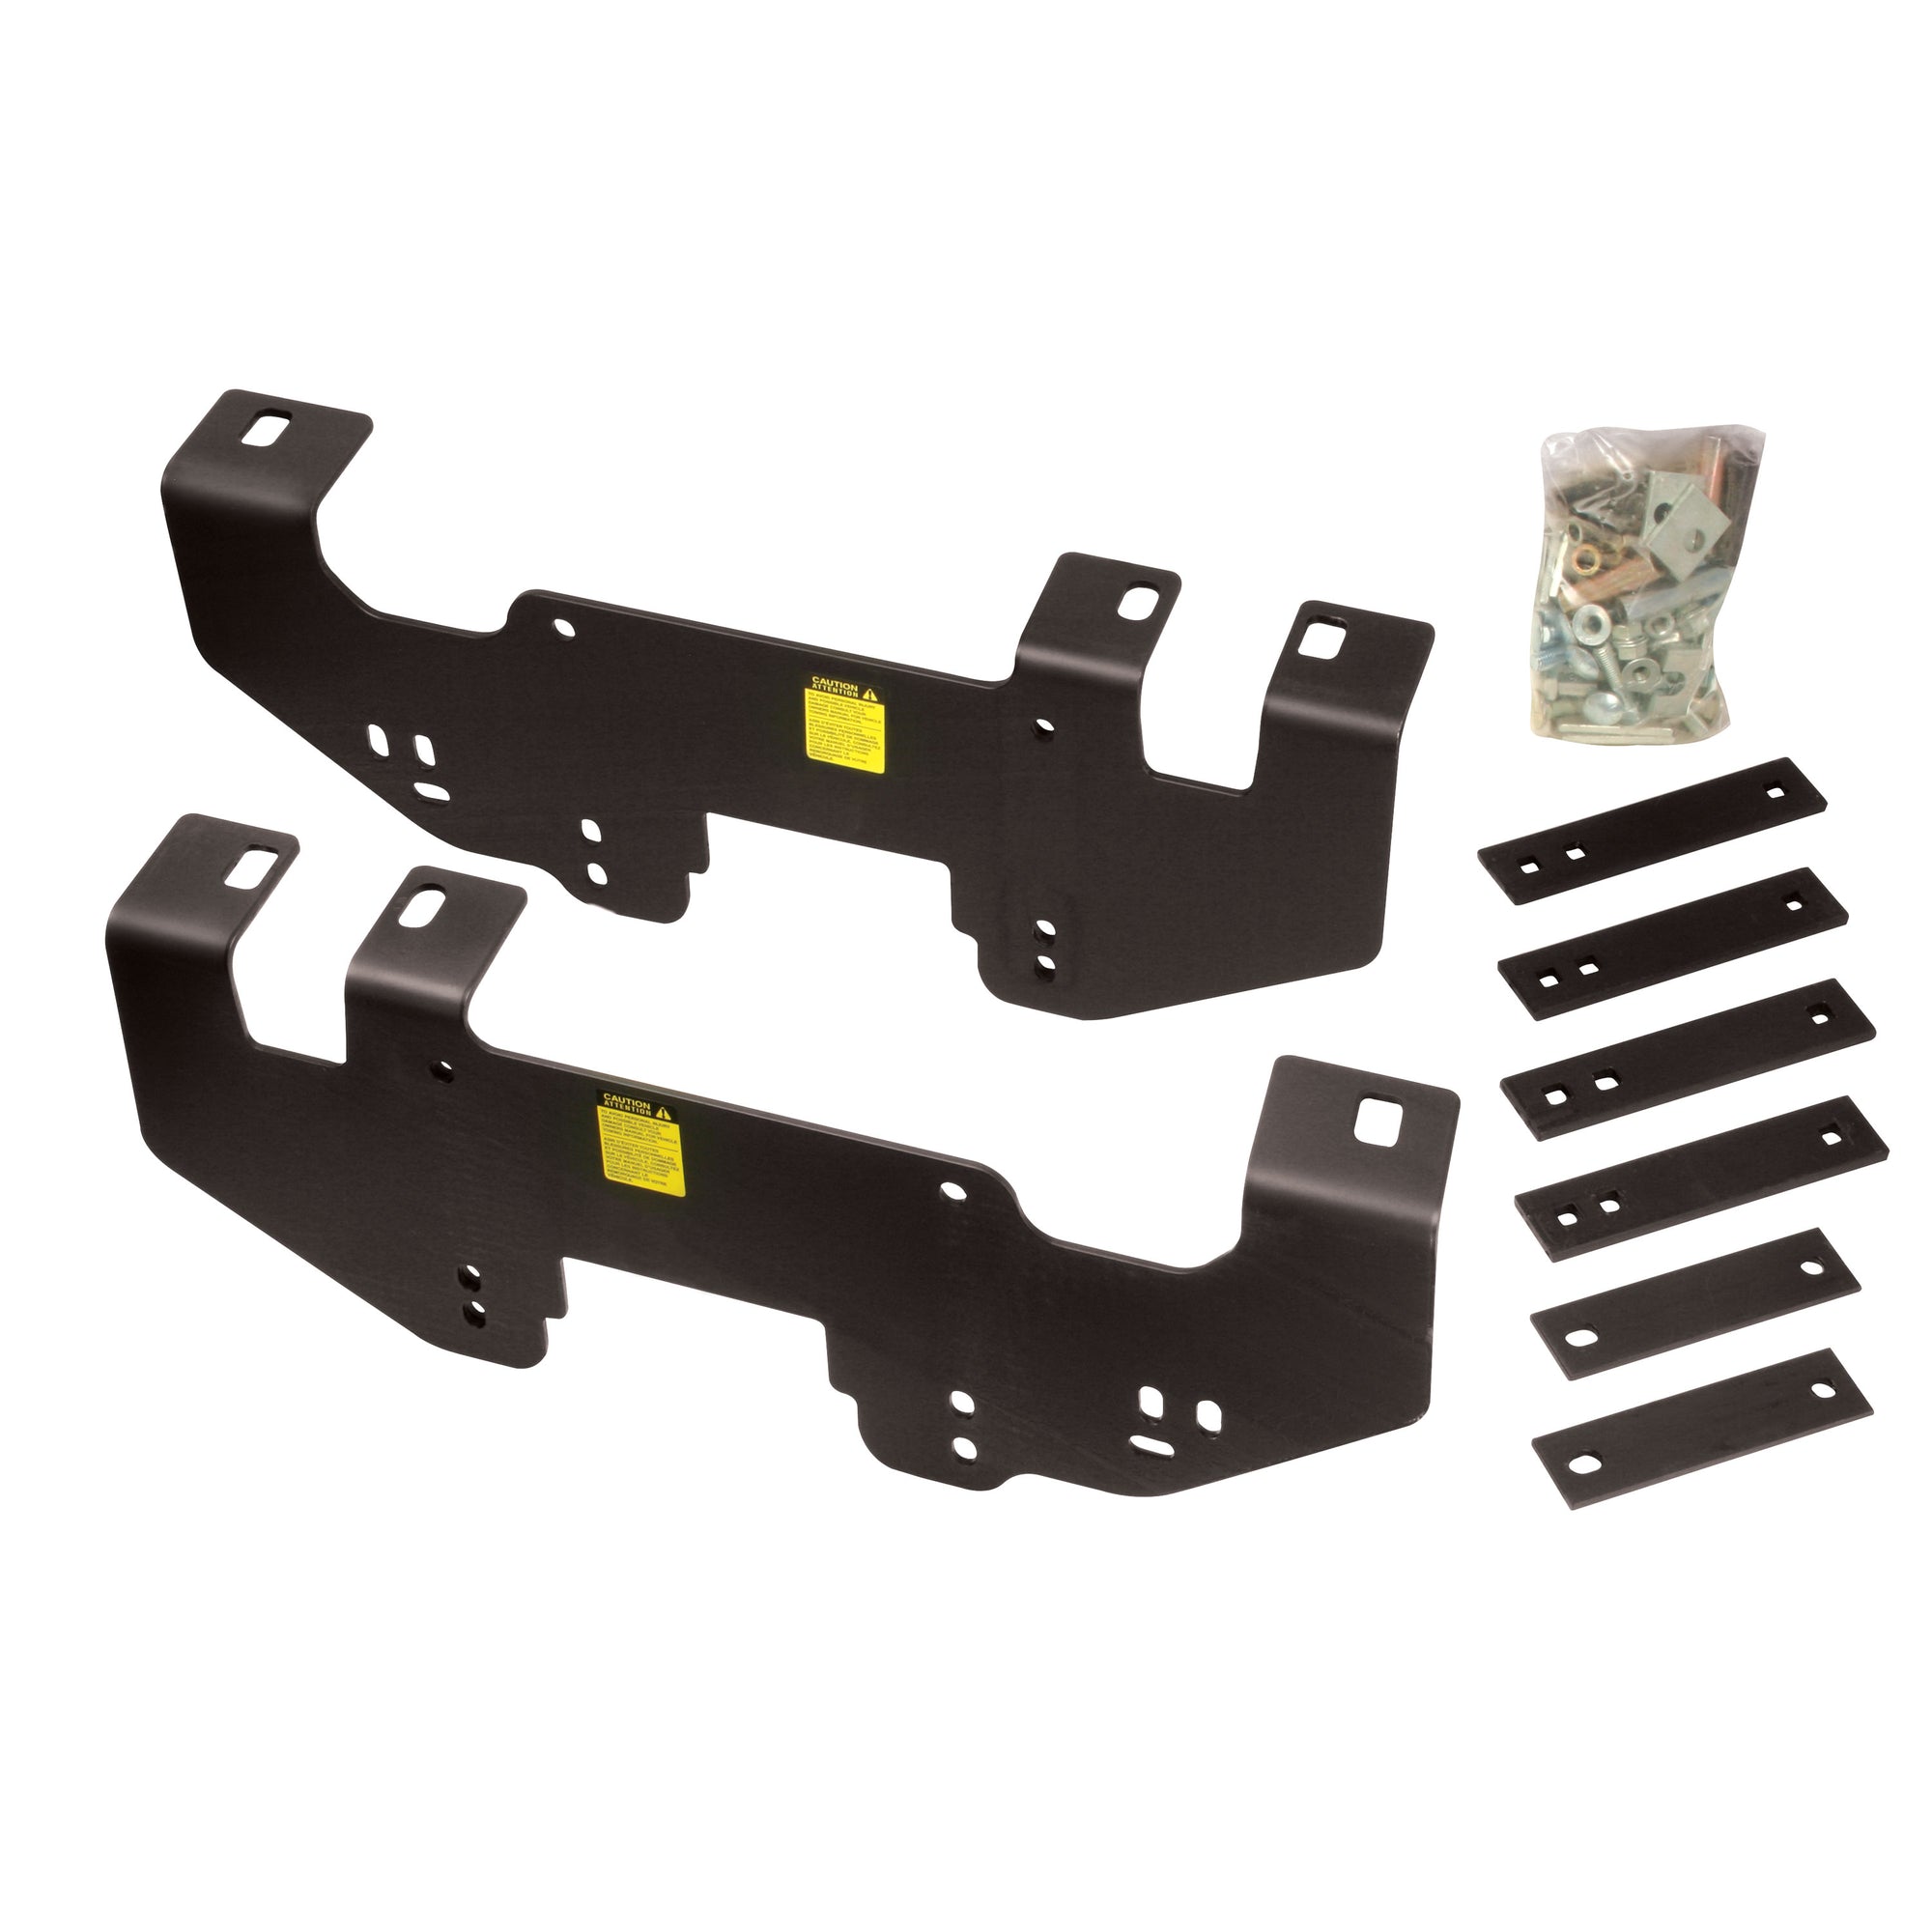 Reese 50040 Outboard Fifth Wheel Trailer Hitch Brackets Only for Dodge Ram/RAM Trucks